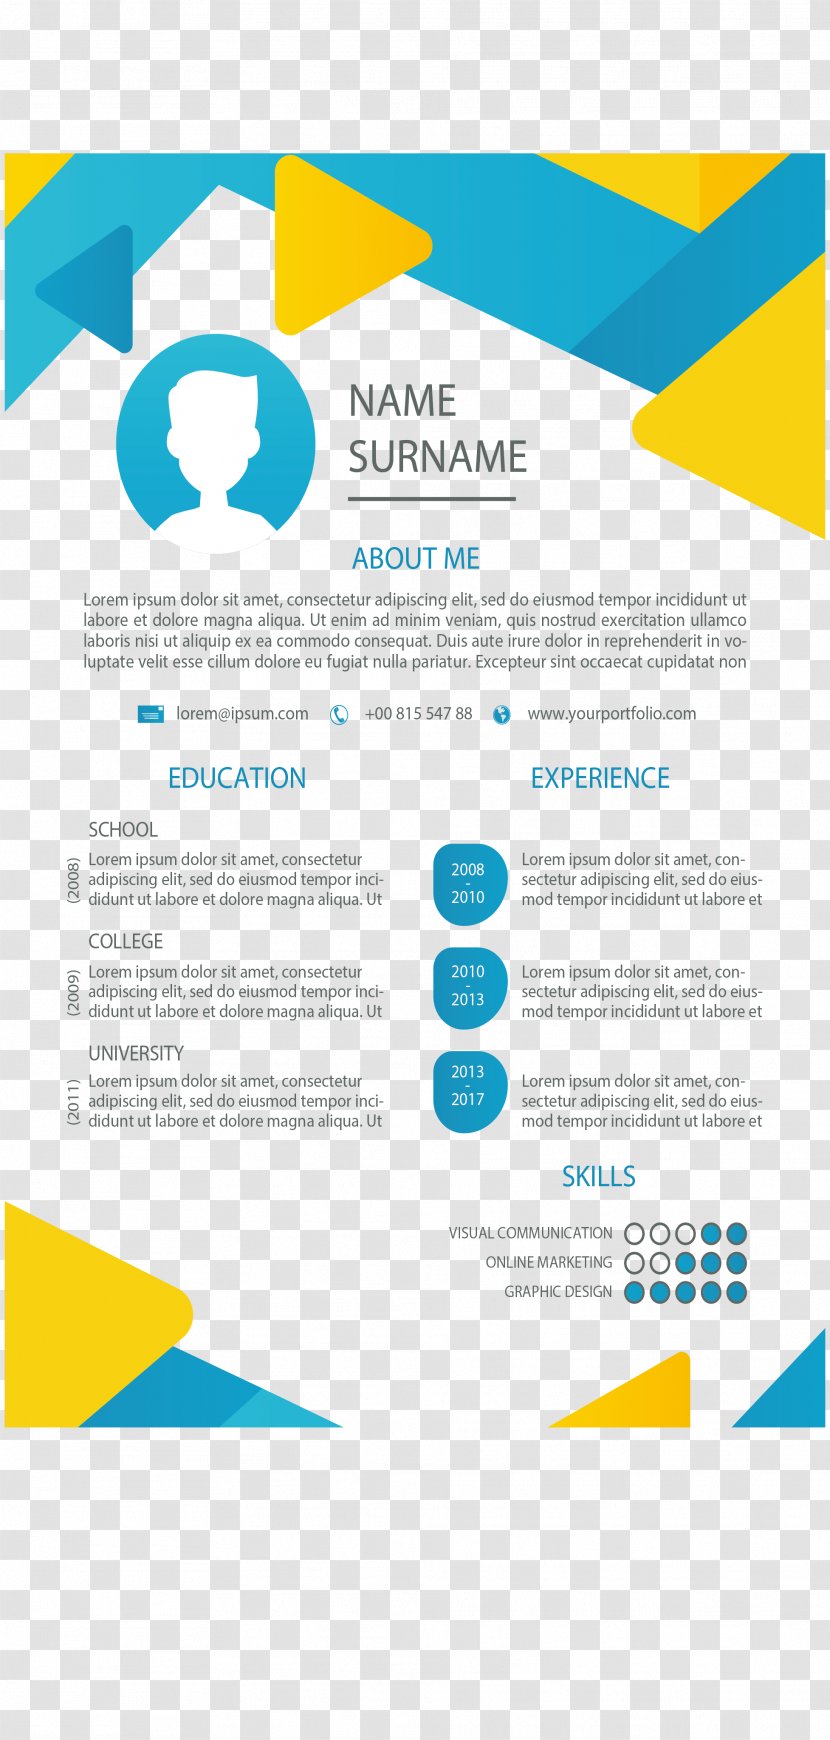 Rxe9sumxe9 Curriculum Vitae Template Cover Letter - Experience - Color Triangle Border Resume Transparent PNG